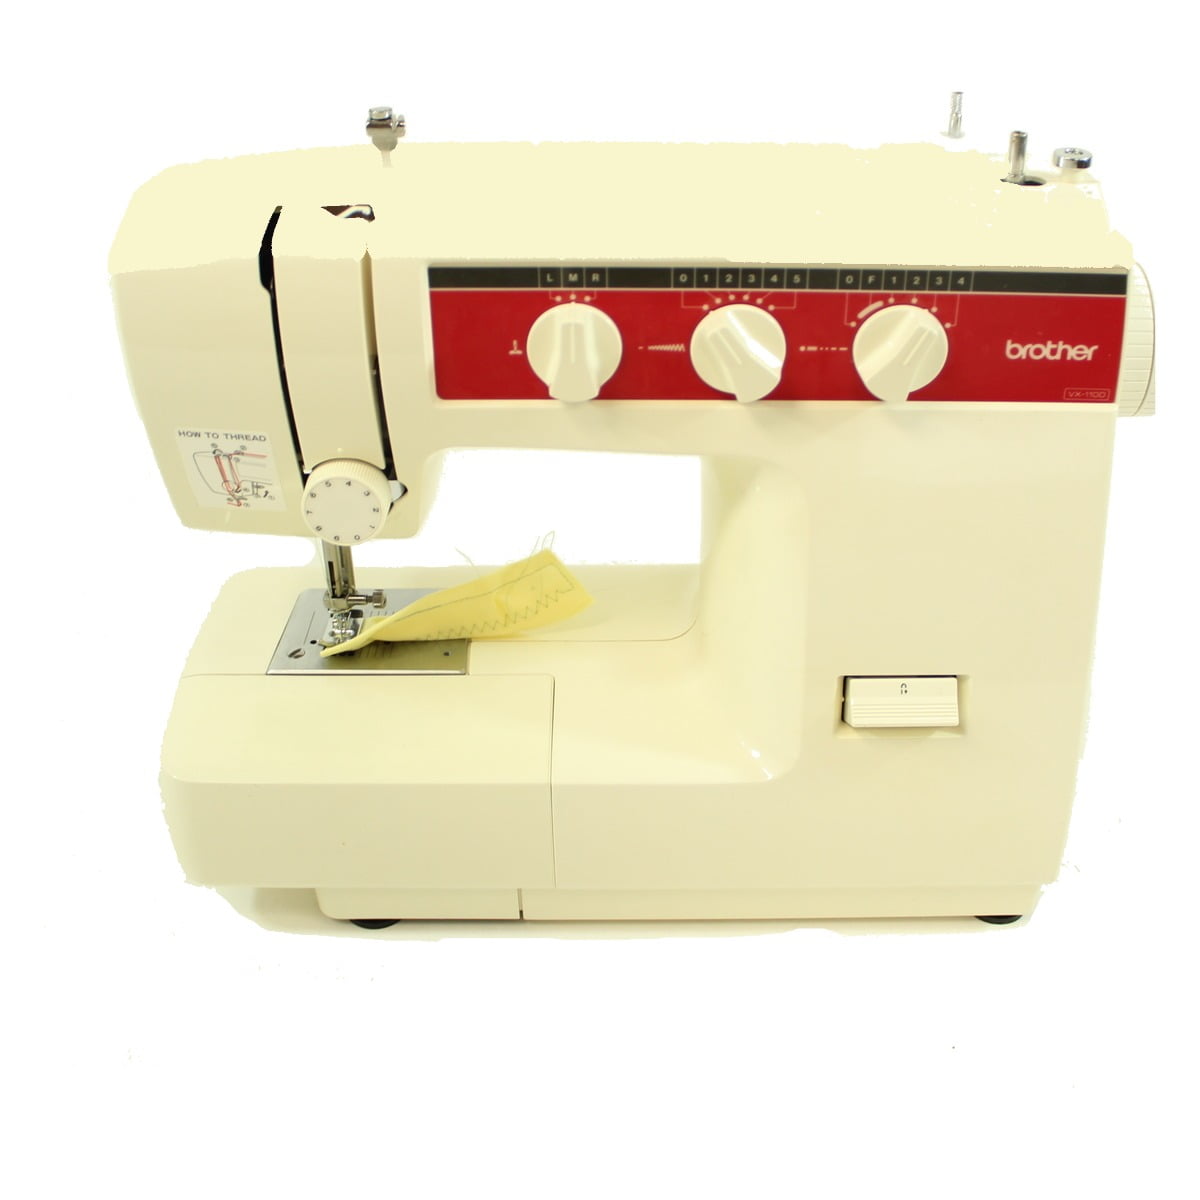 Brother VX-1100 Sewing Machine